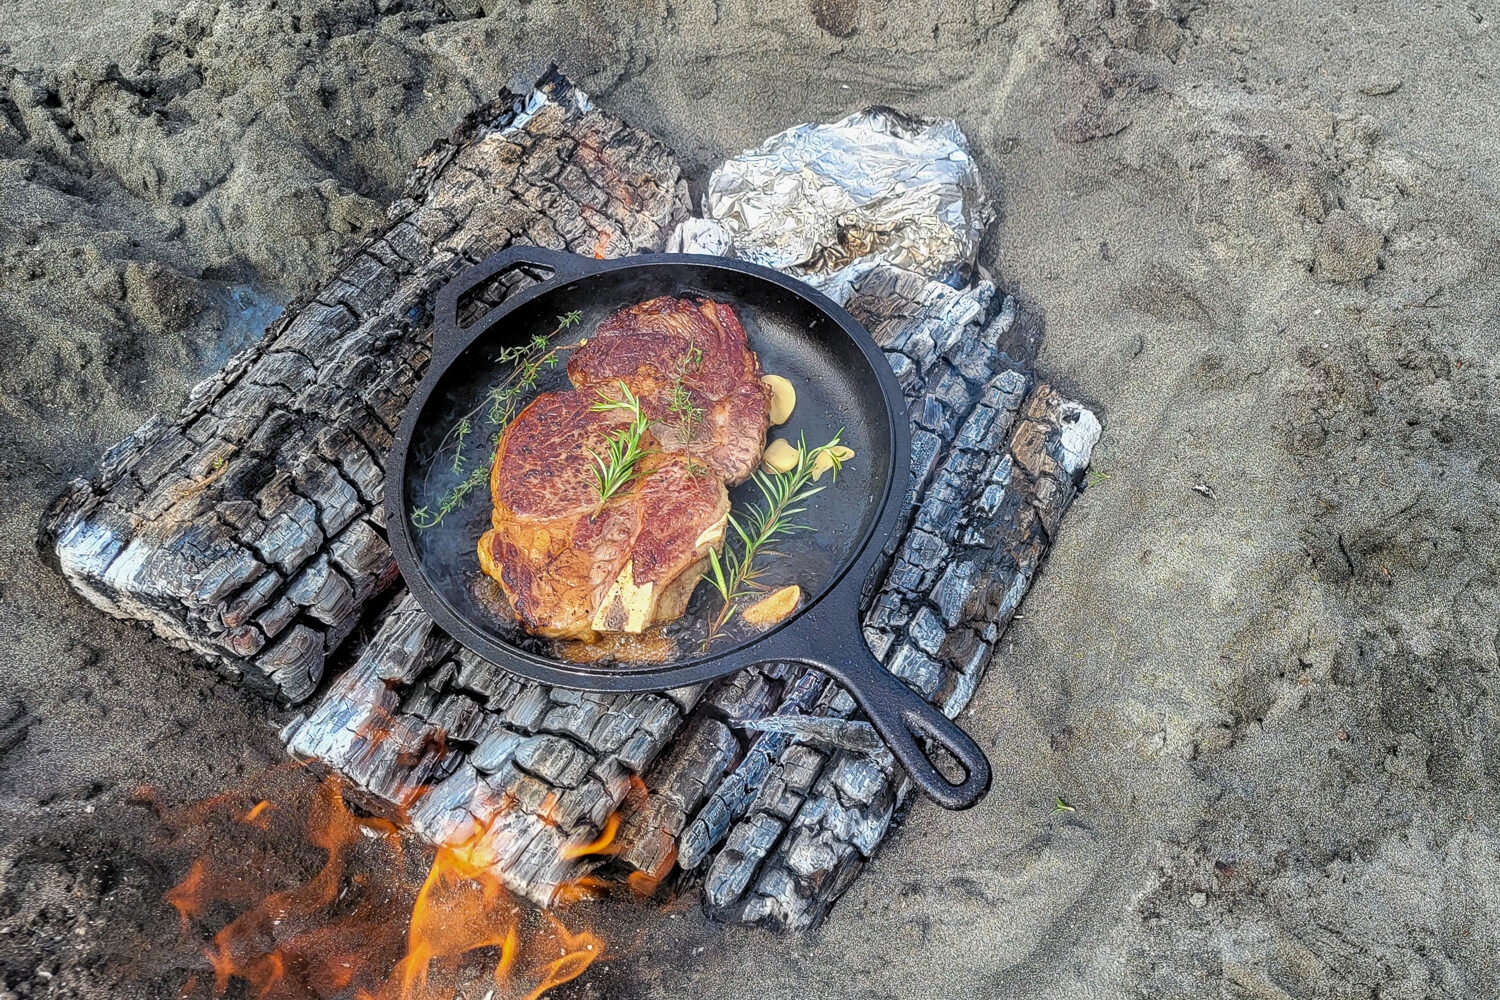 Cast iron is heavy, but it’s durable, a great value, & highly versatile for home & Camp cooking